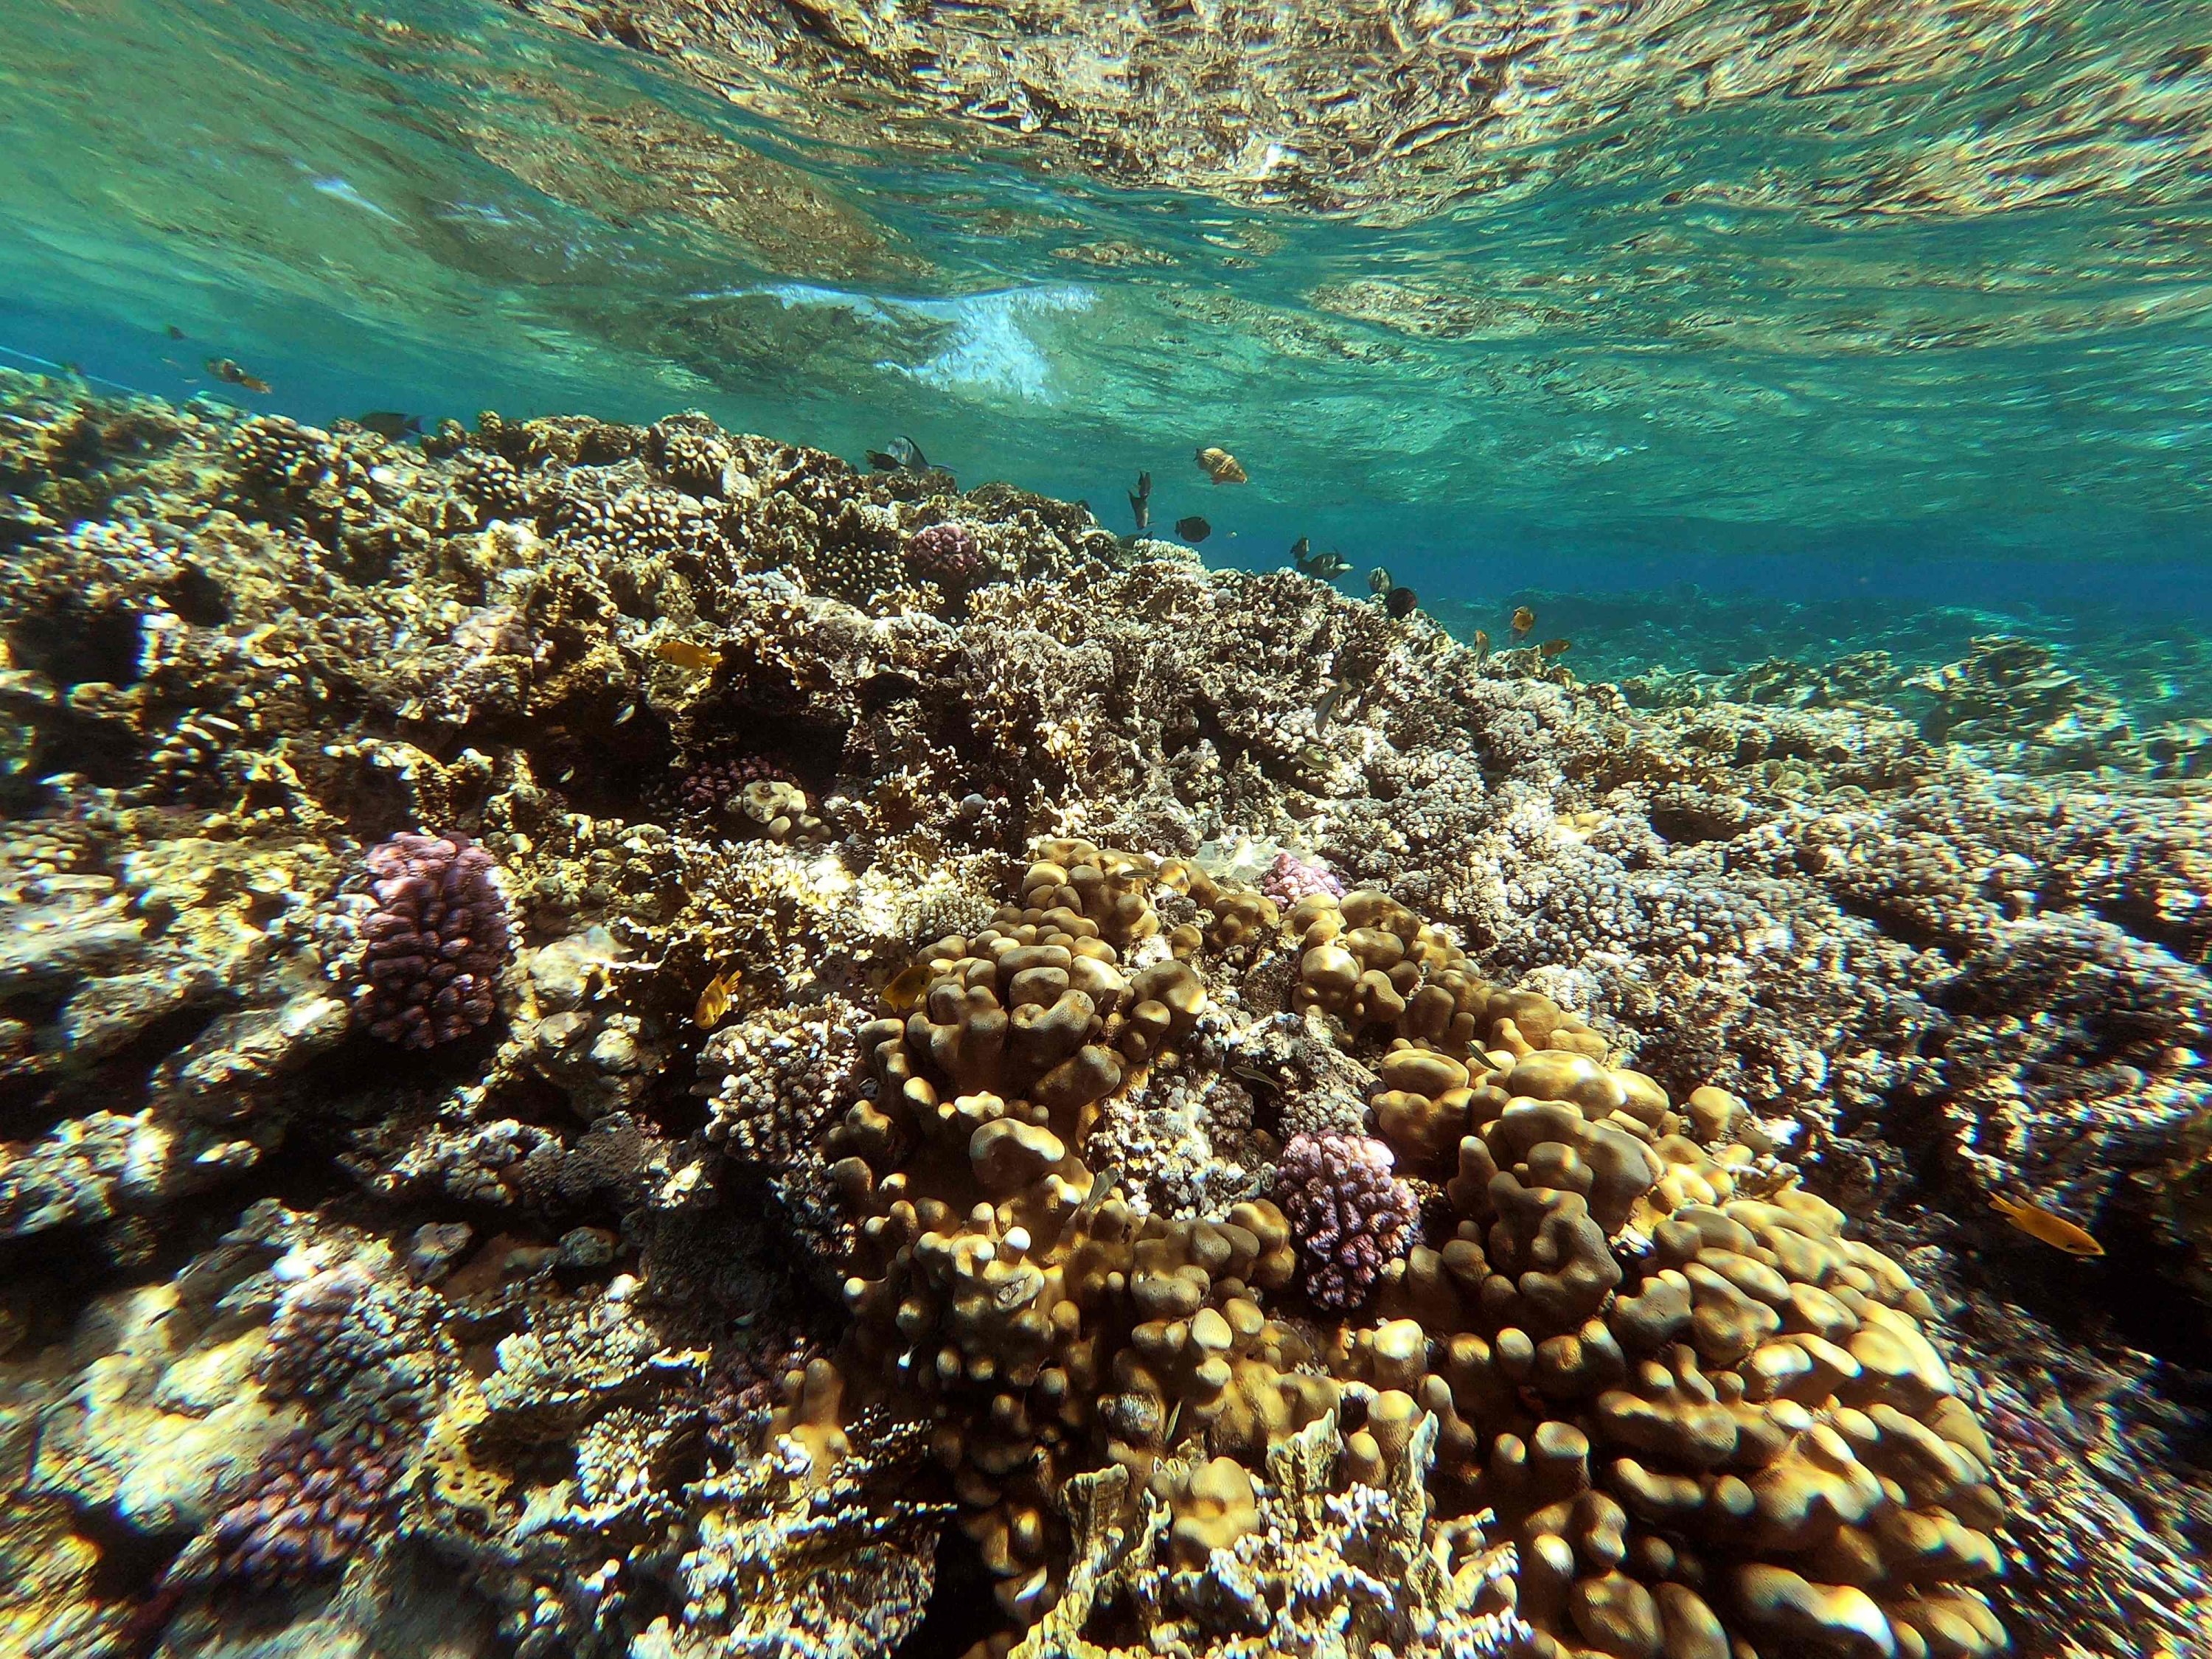 A view of a coral reef near Egypt